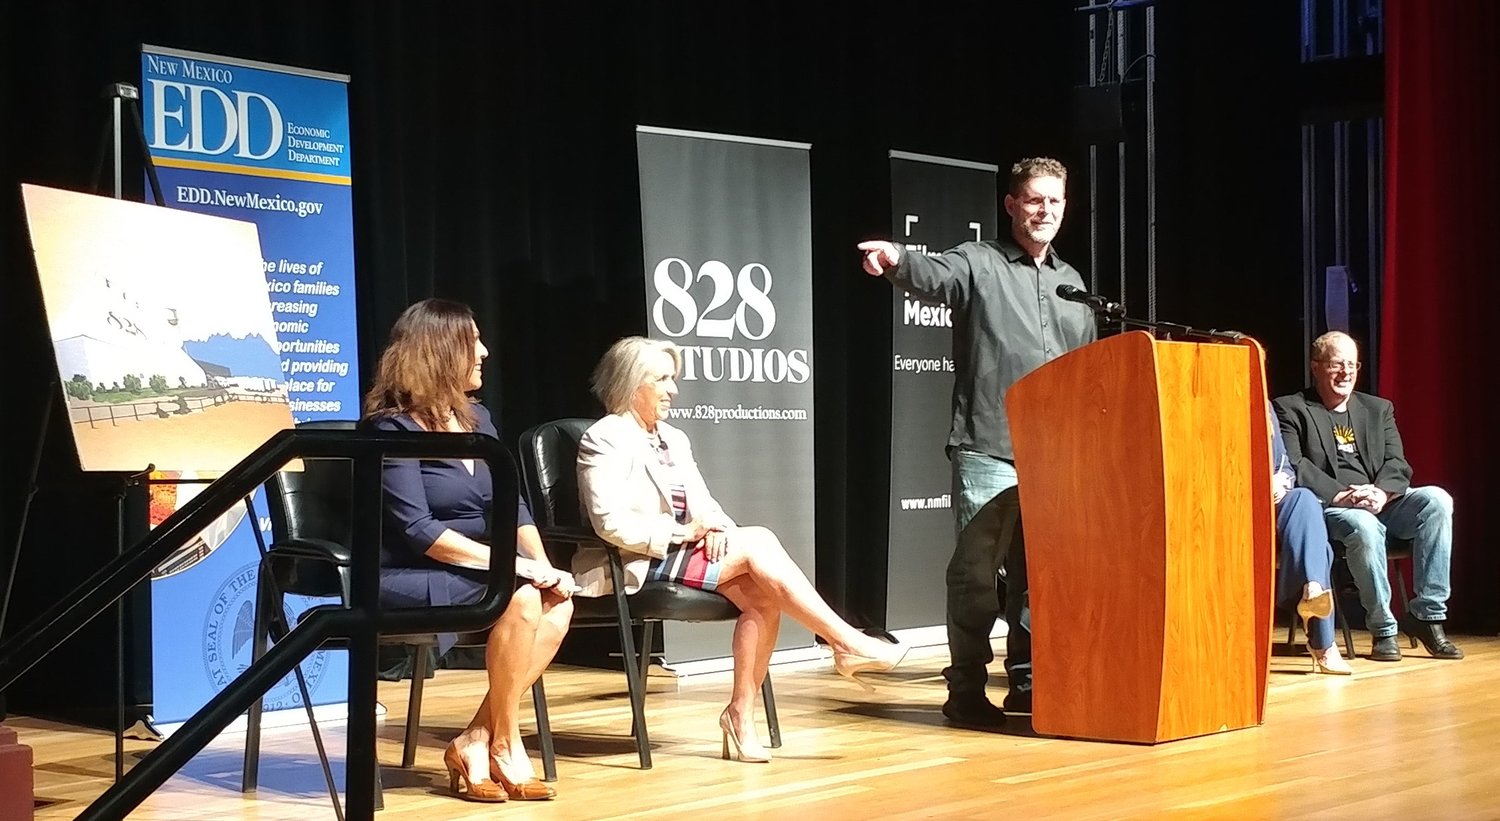 828 Productions CEO and founder Todd Lundbohm points to an artist’s rendering of the film studio he will bring to Las Cruces. With him on stage at the Rio Grande Theatre during the announcement were, left to right, Las Cruces Mayor Pro Tempore Kasandra Gandara, Gov. Michelle Lujan Grisham and state Sen. Jeff Steinborn. On the other side of the podium is New Mexico Economic Development Dept. Sec. Alicia J. Keyes.